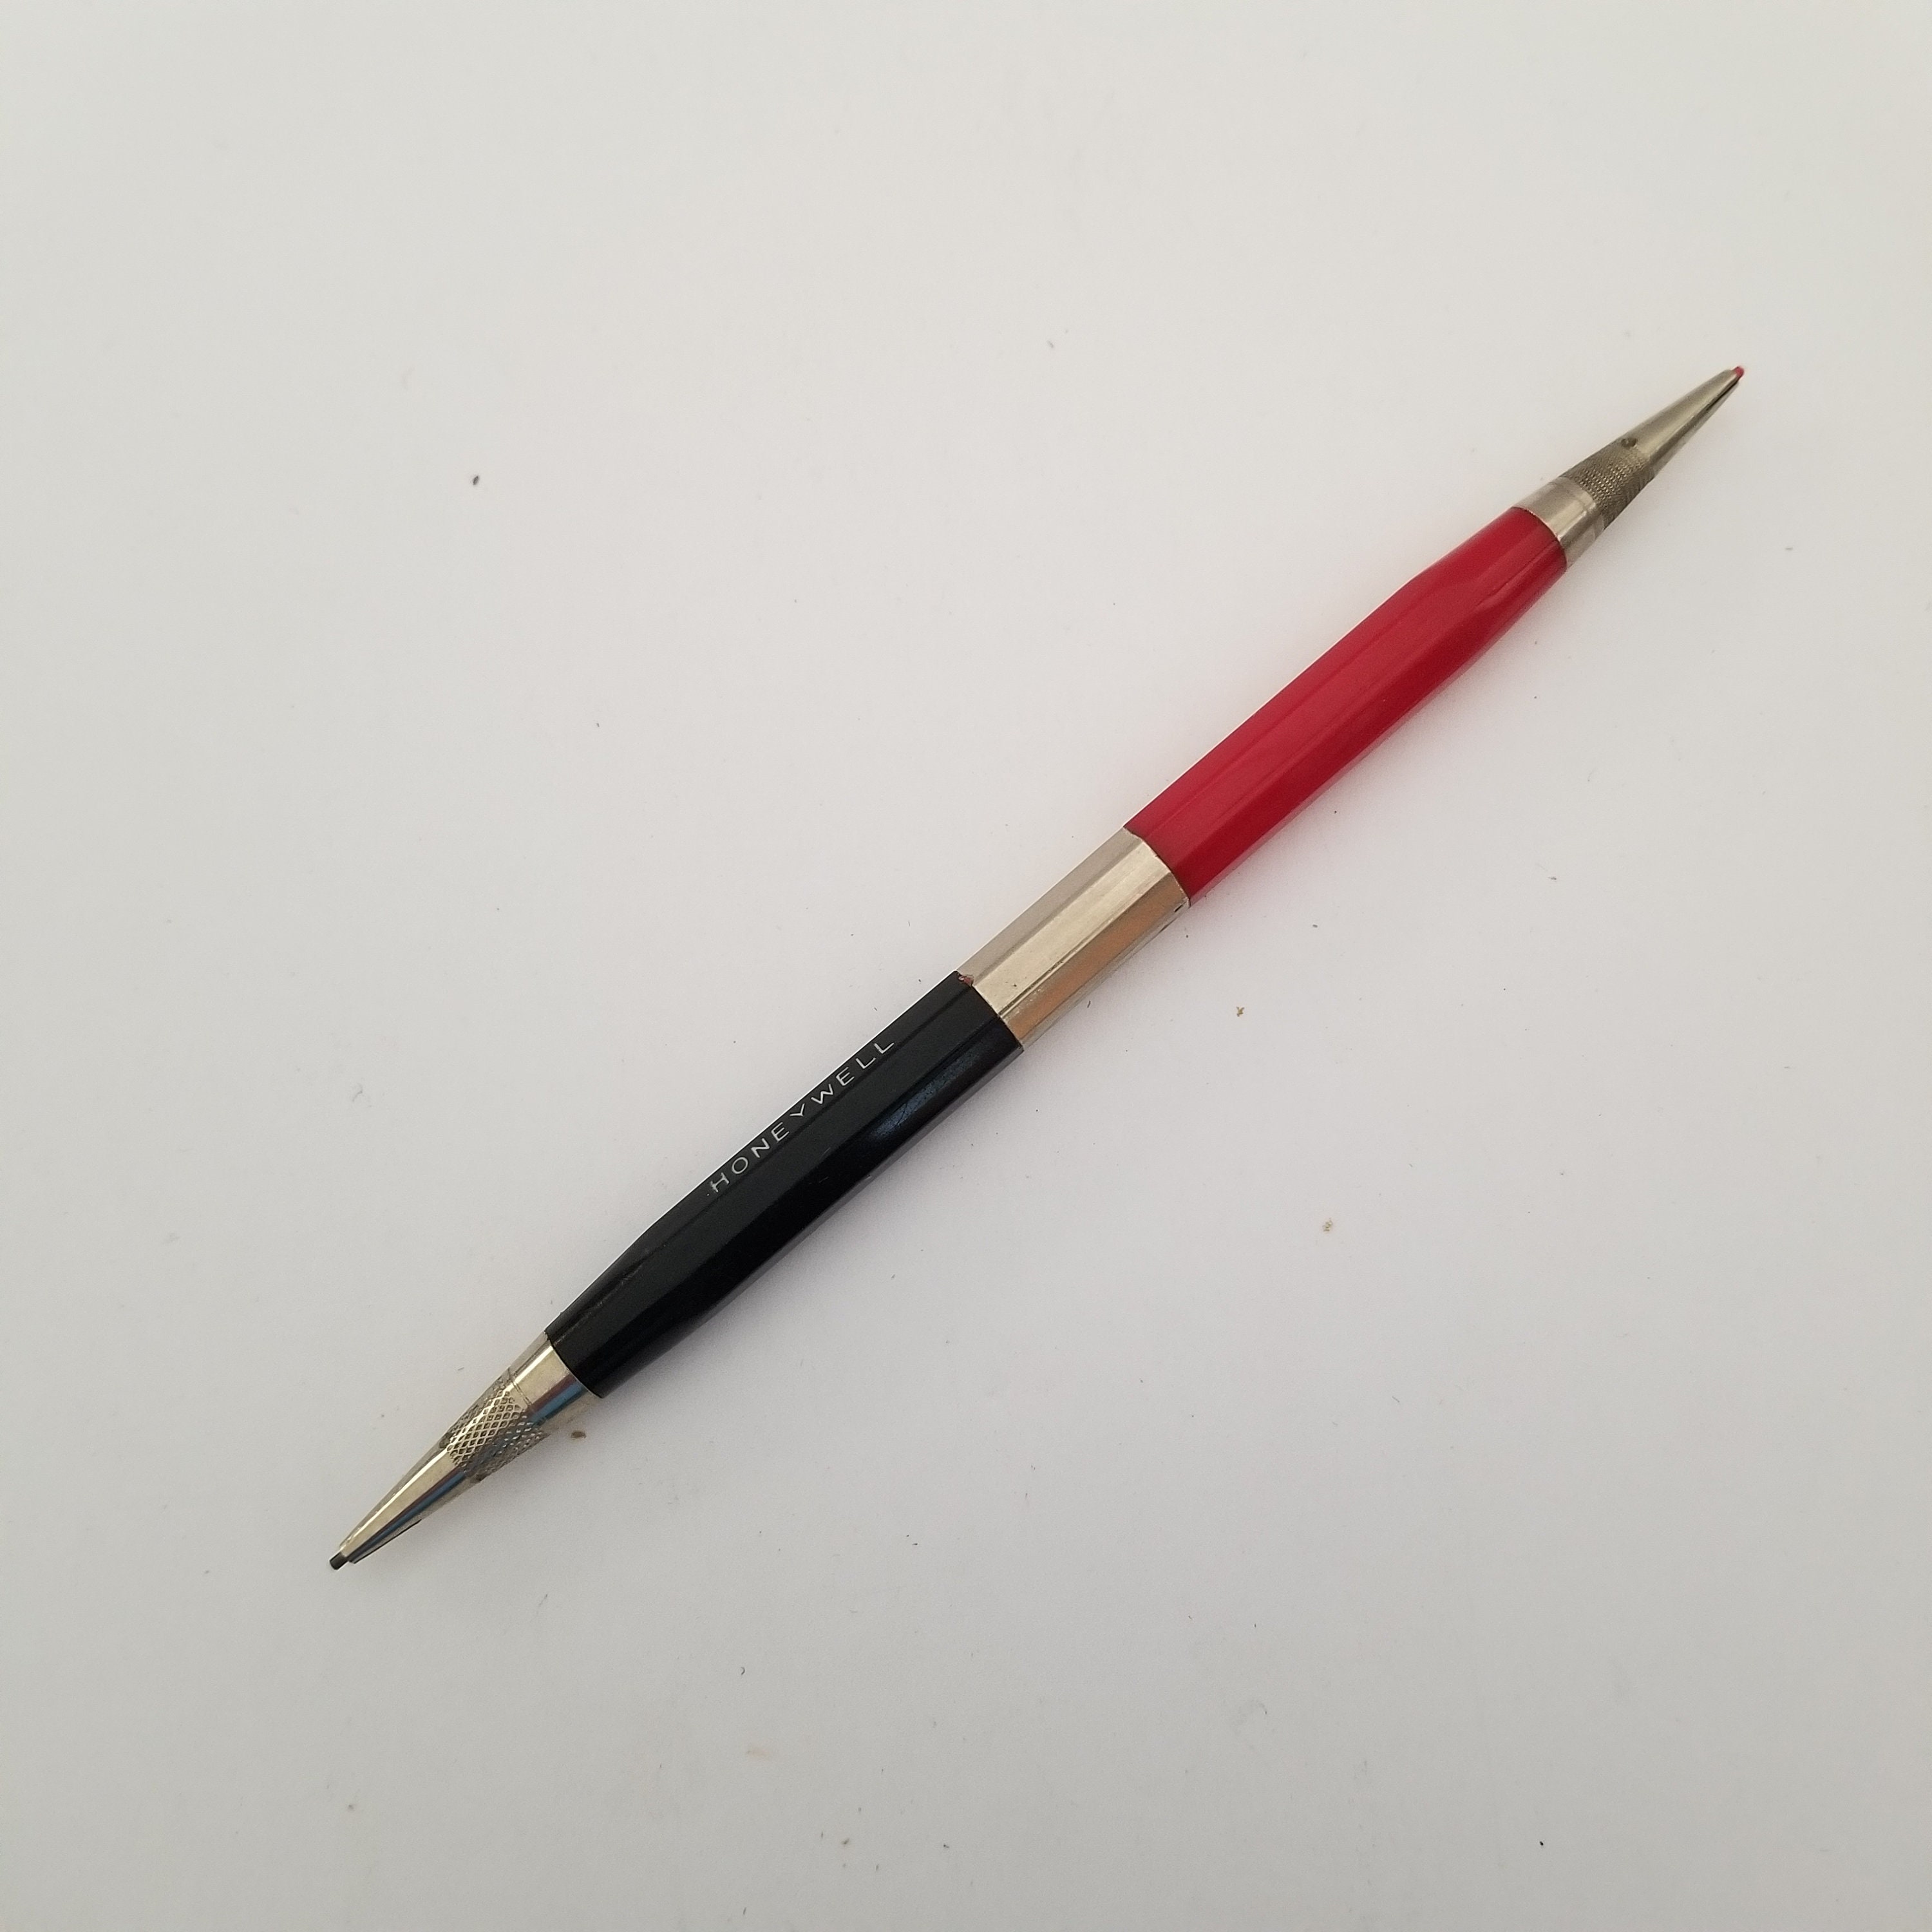 Portable Engraving Pen! No-Skill-Required  Lately, I've struggled with  big and heavy rotary tools to get the results I wanted in my crafts. Last  month I saw the customizer and gave it